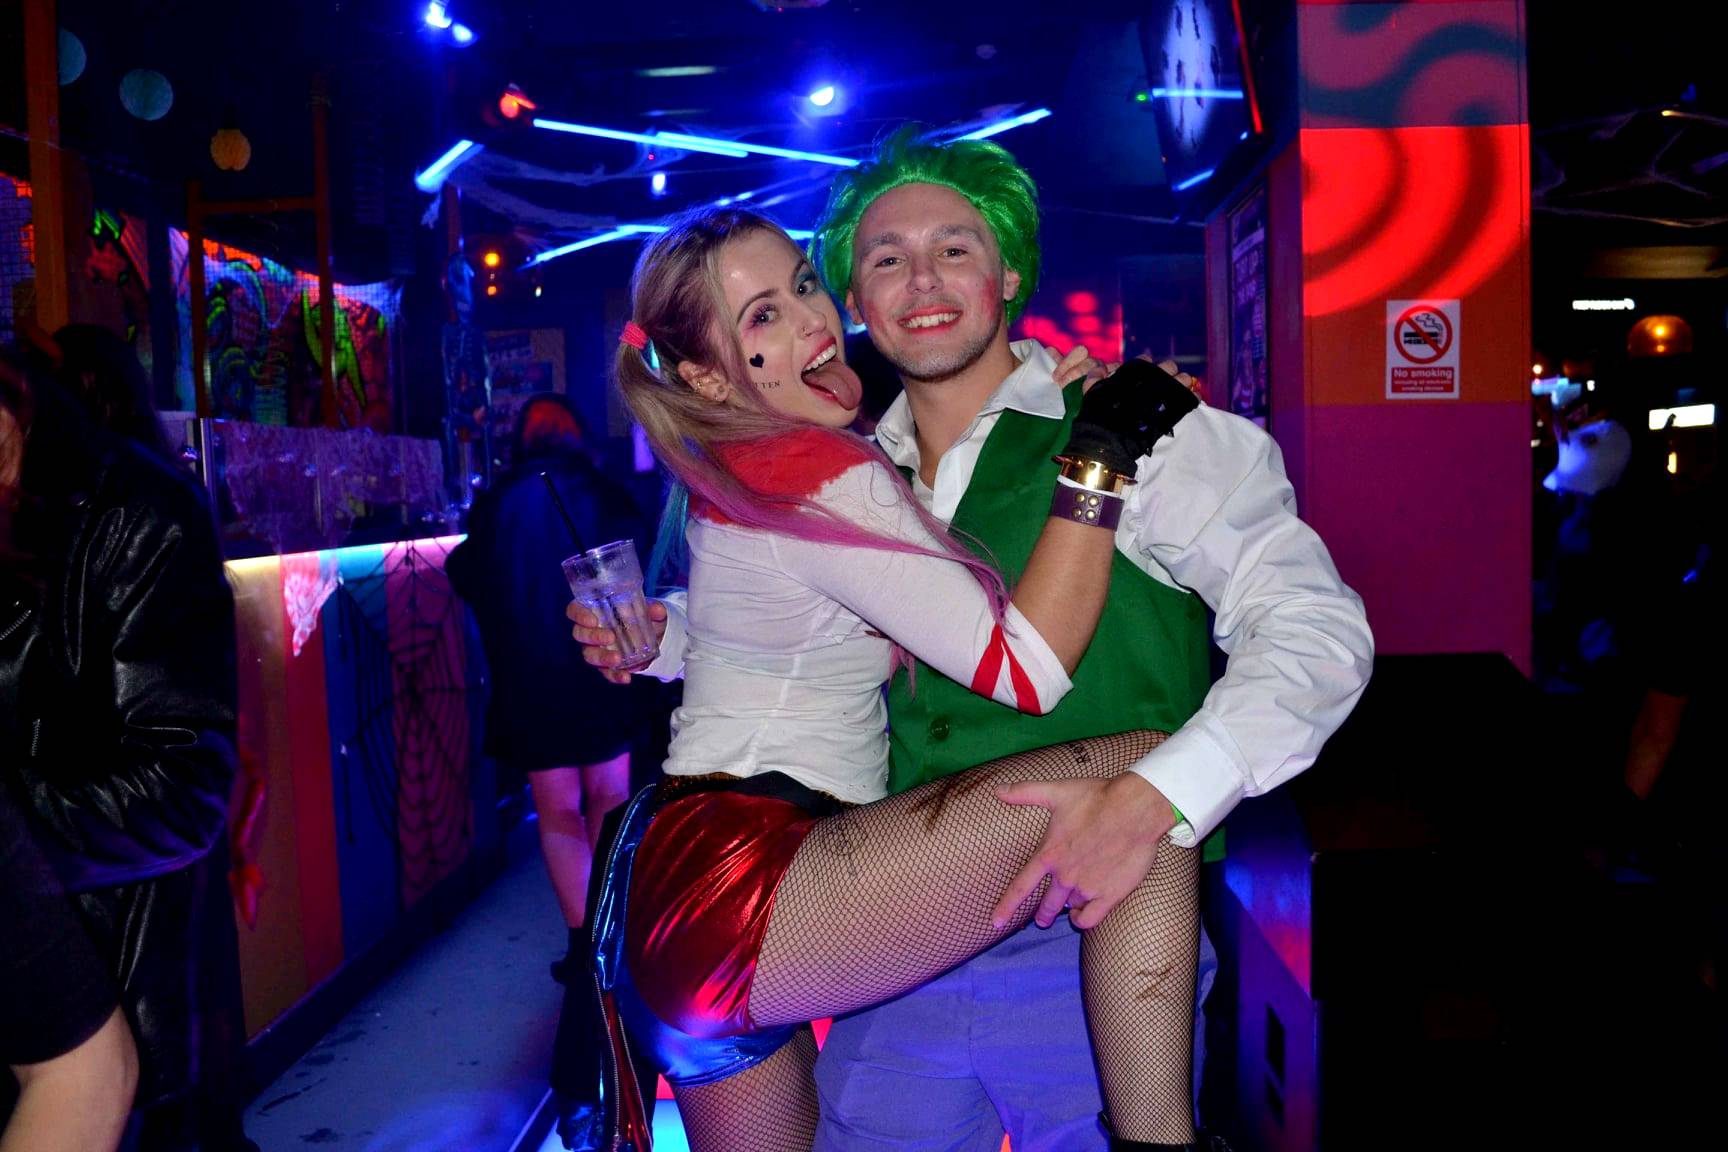 Two characters - harley quinn and the joker - pose for a photo on the Halloween pub crawl on Brighton's best night out